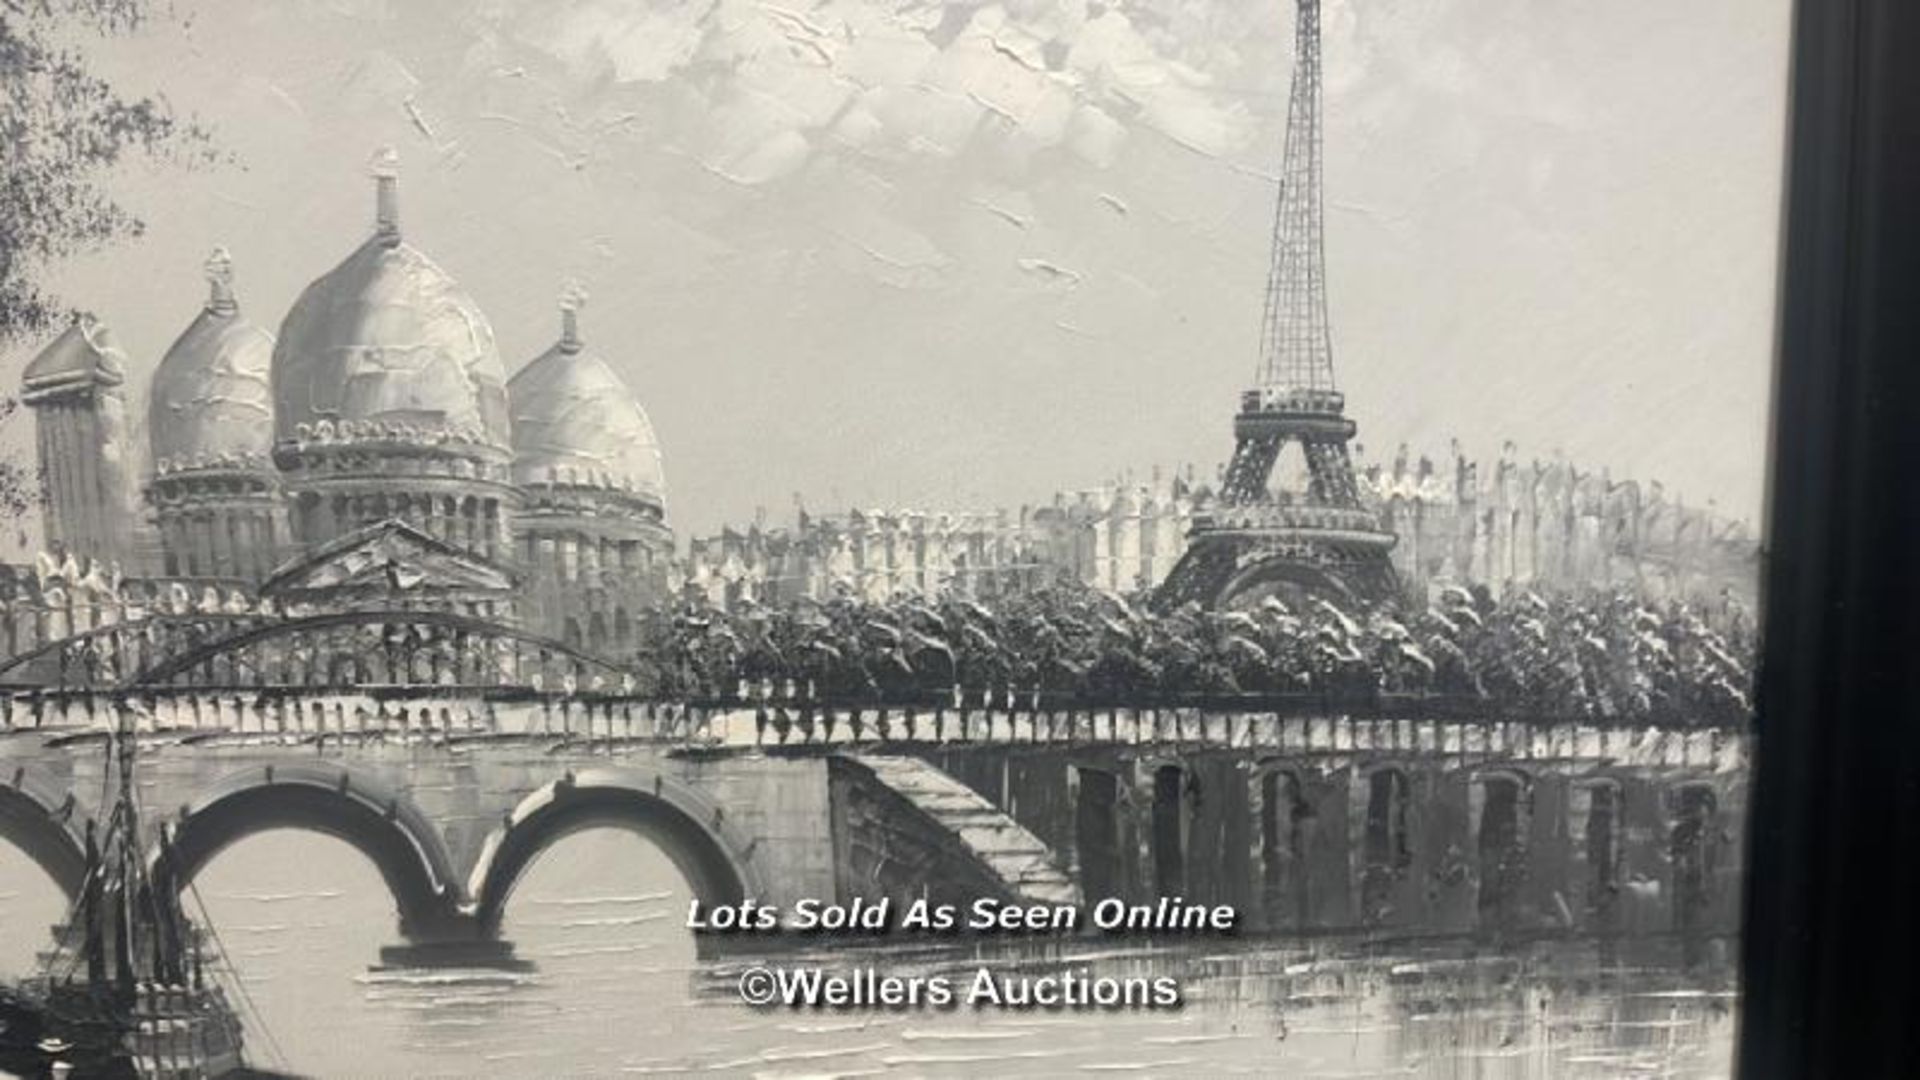 *OIL ON CANVAS OF PARIS BY THE RIVER SIGNED "BURNET" 61 X 51CM - Image 3 of 6